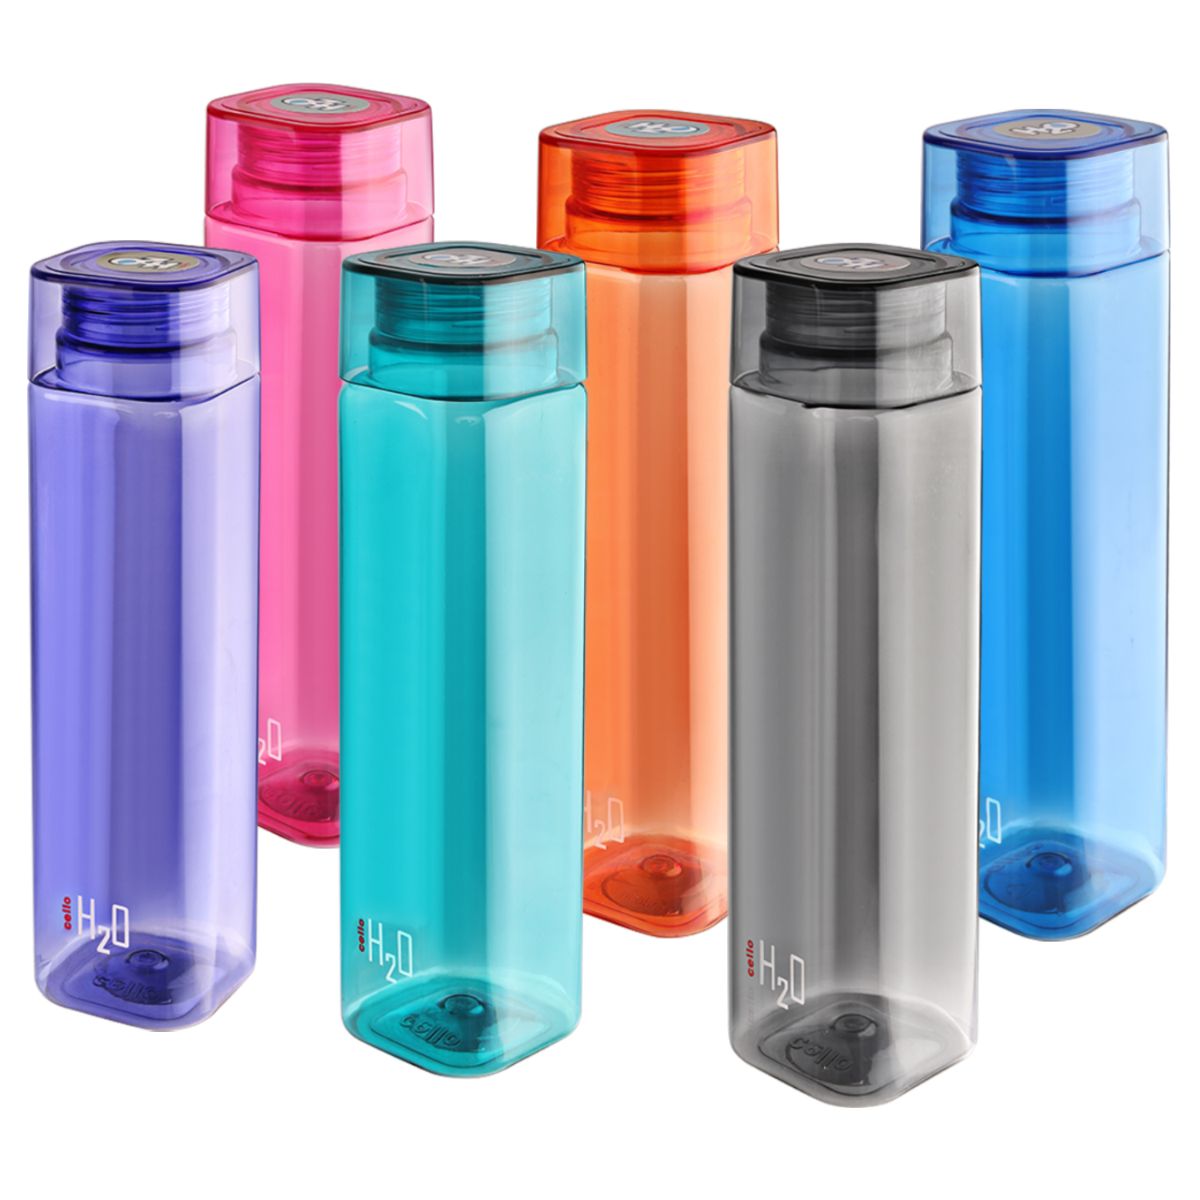 H2O Squaremate Plastic Water Bottle, 1000ml, Set of 6 Assorted / 1000ml / 6 Pieces